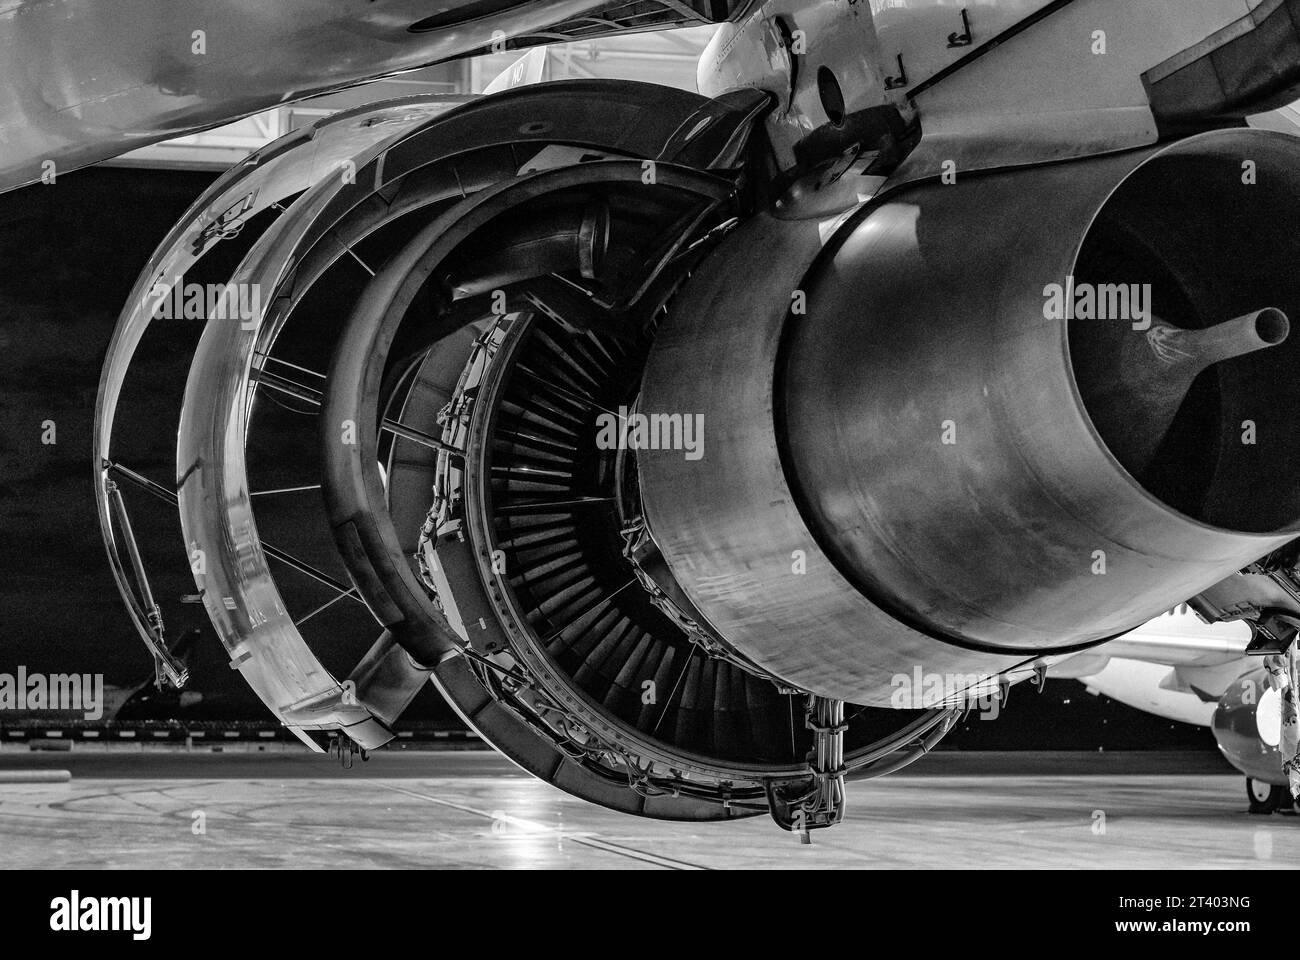 Aircraft detail. Maintenance of aircraft engine in the hangar at night. Black and white photo. Stock Photo